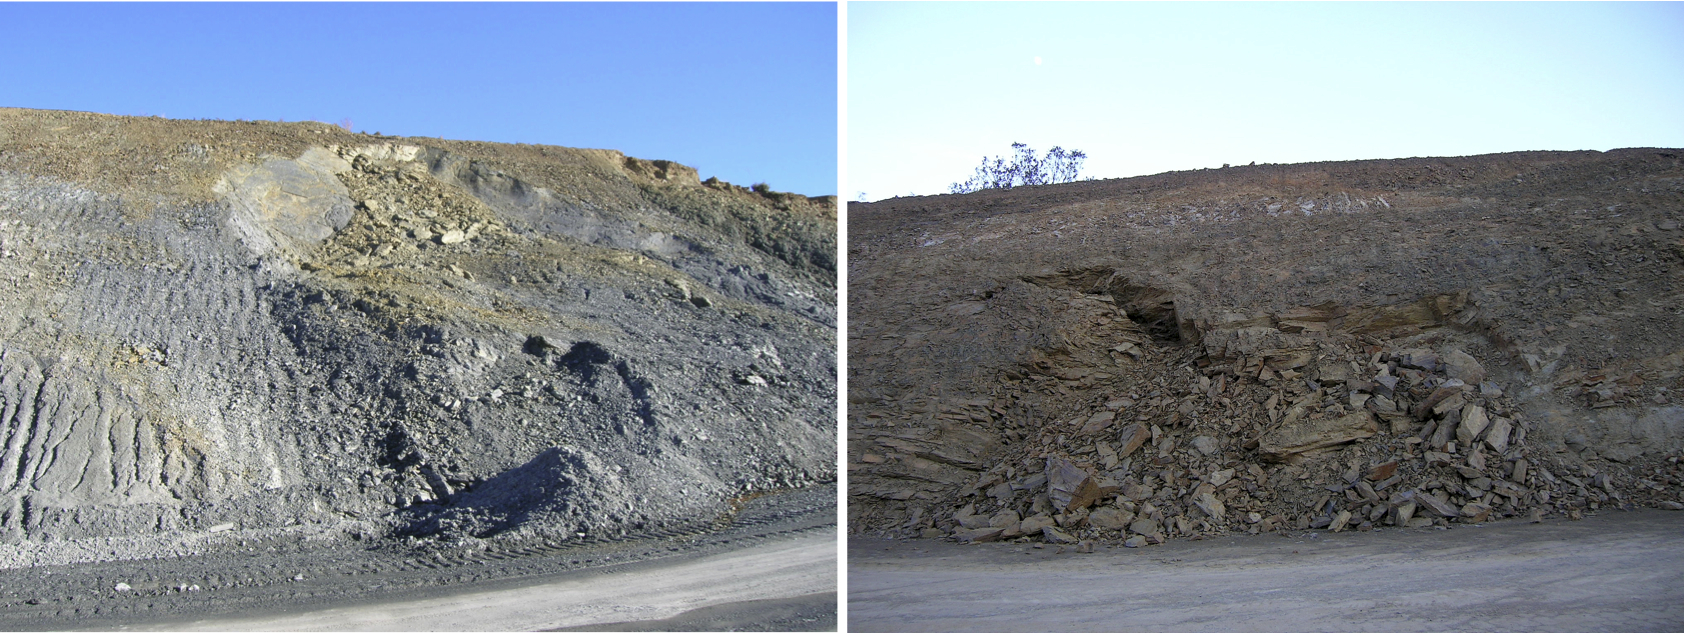 examples of landslides in the course of the Autovía Mudéjar road construction